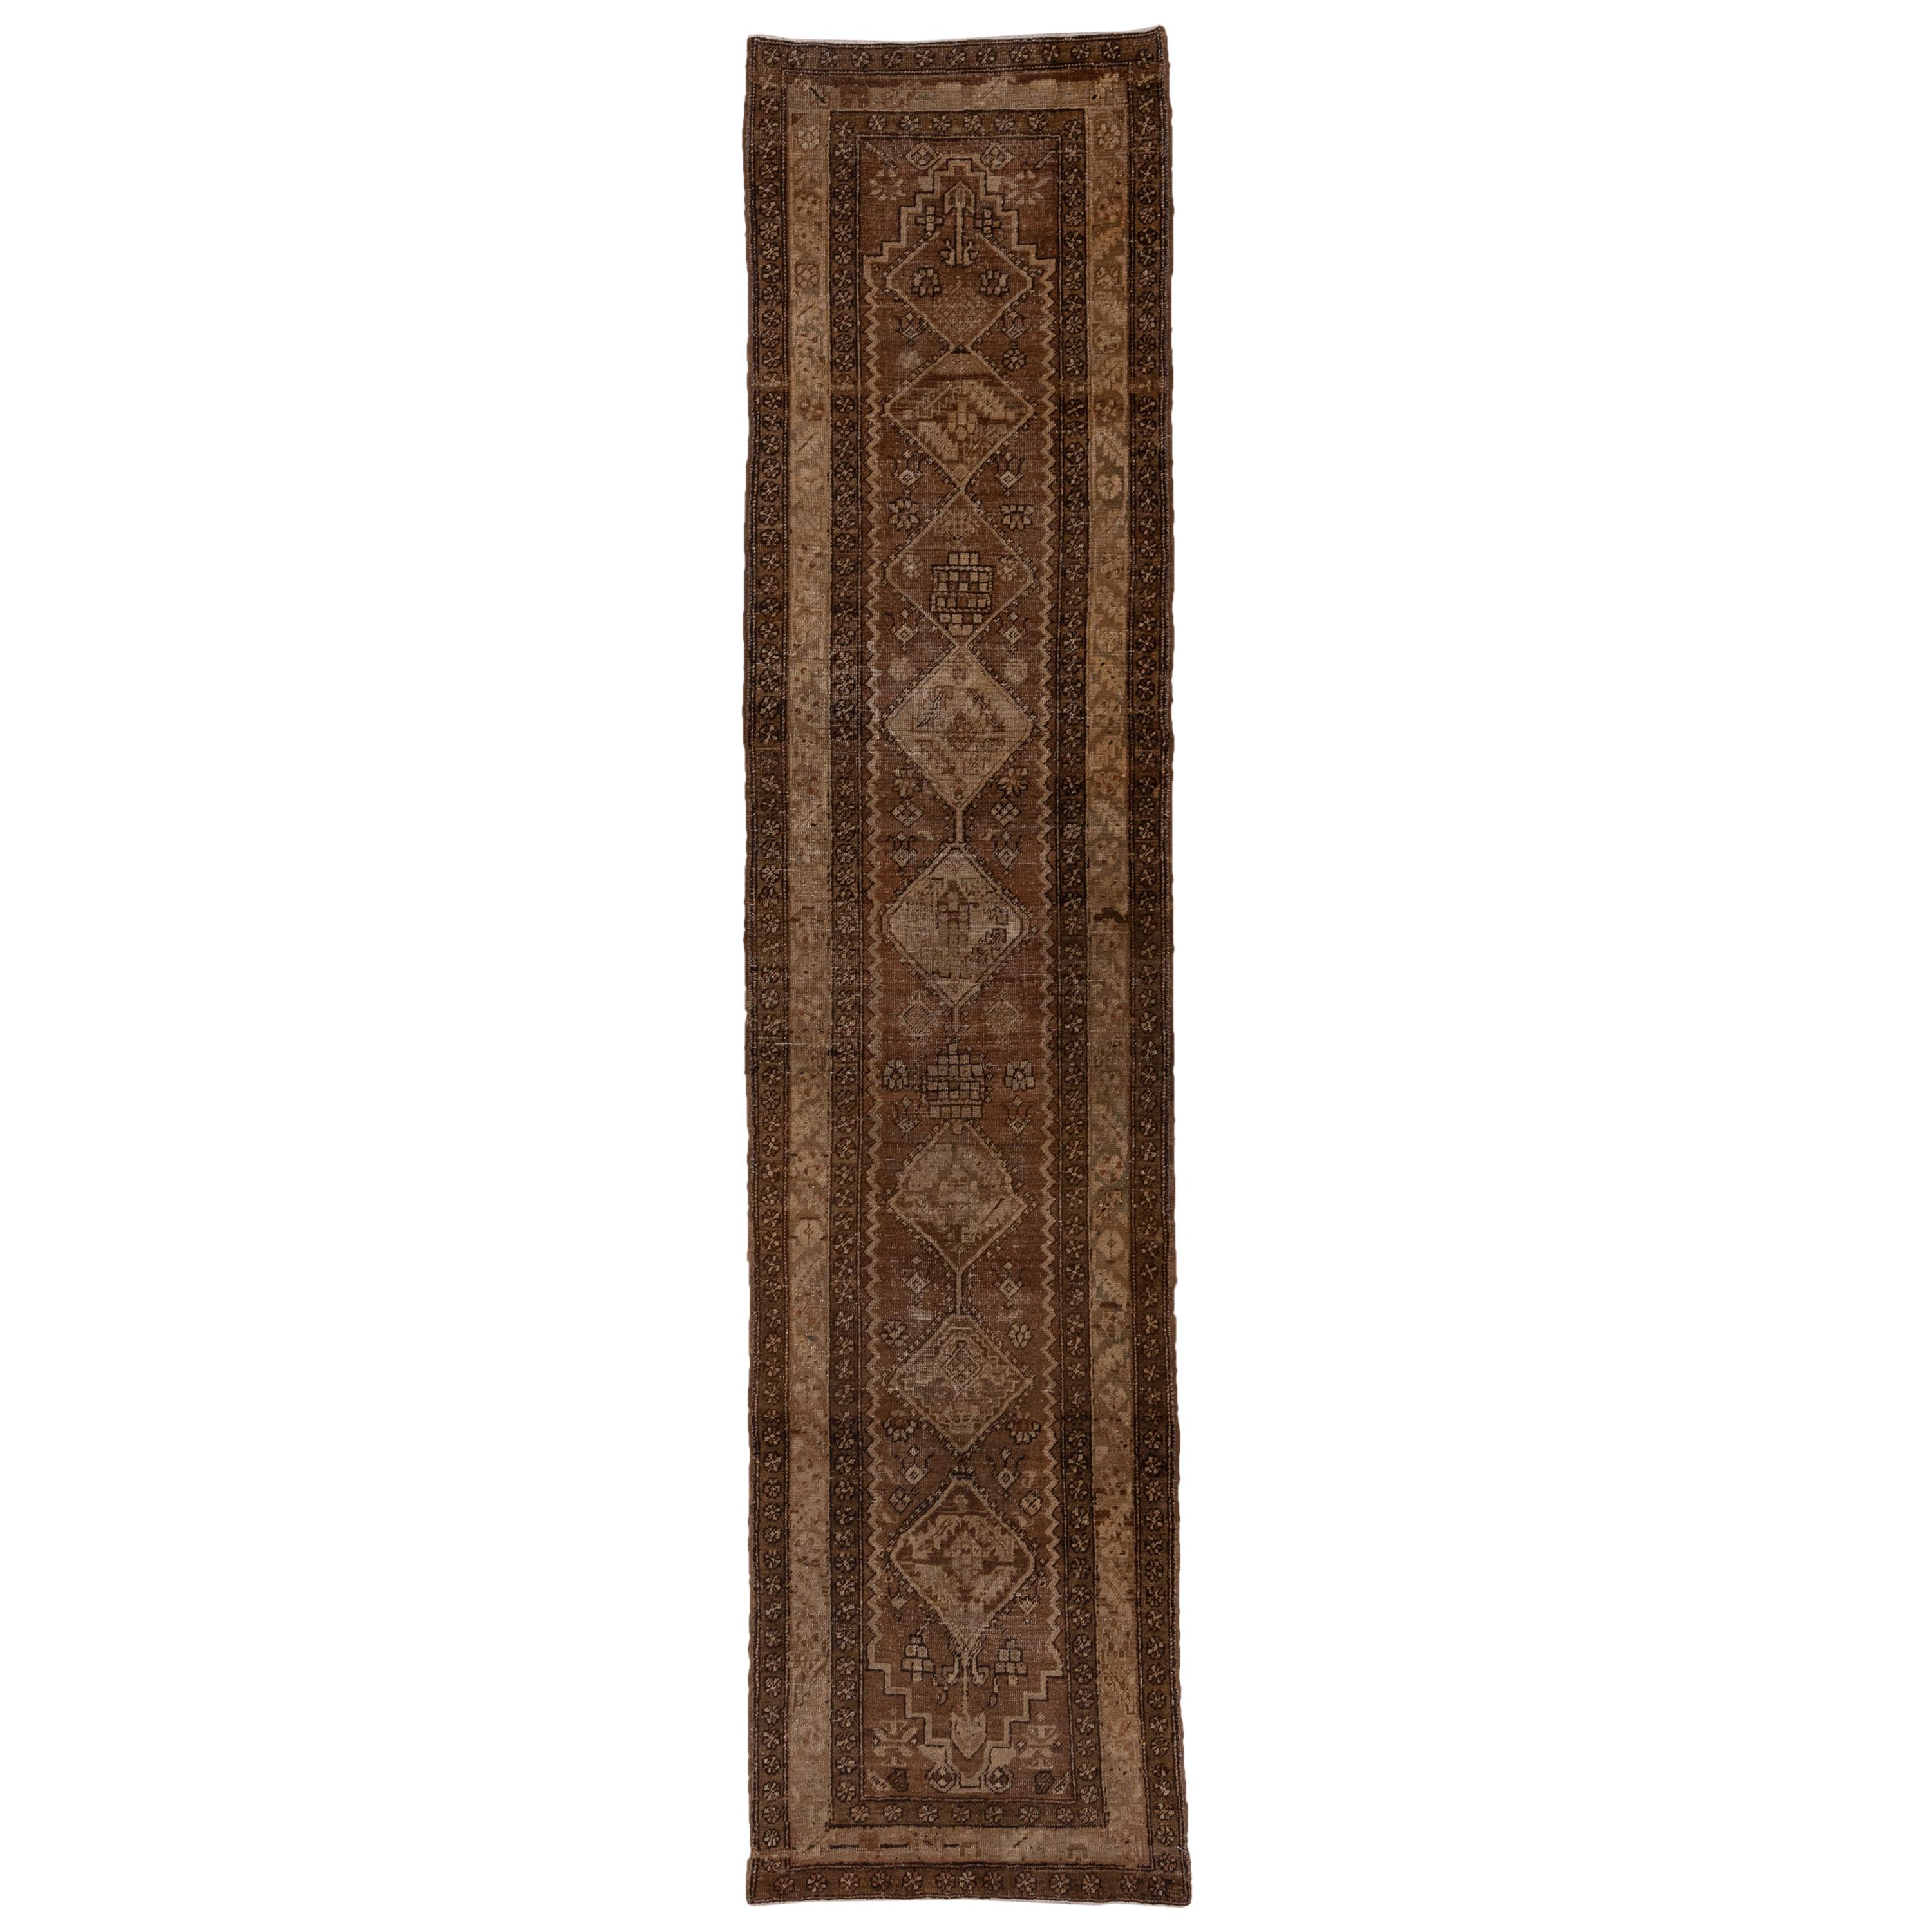 Antique Persian Heriz Runner, Brown Tone on Tone Field, circa 1930s For Sale